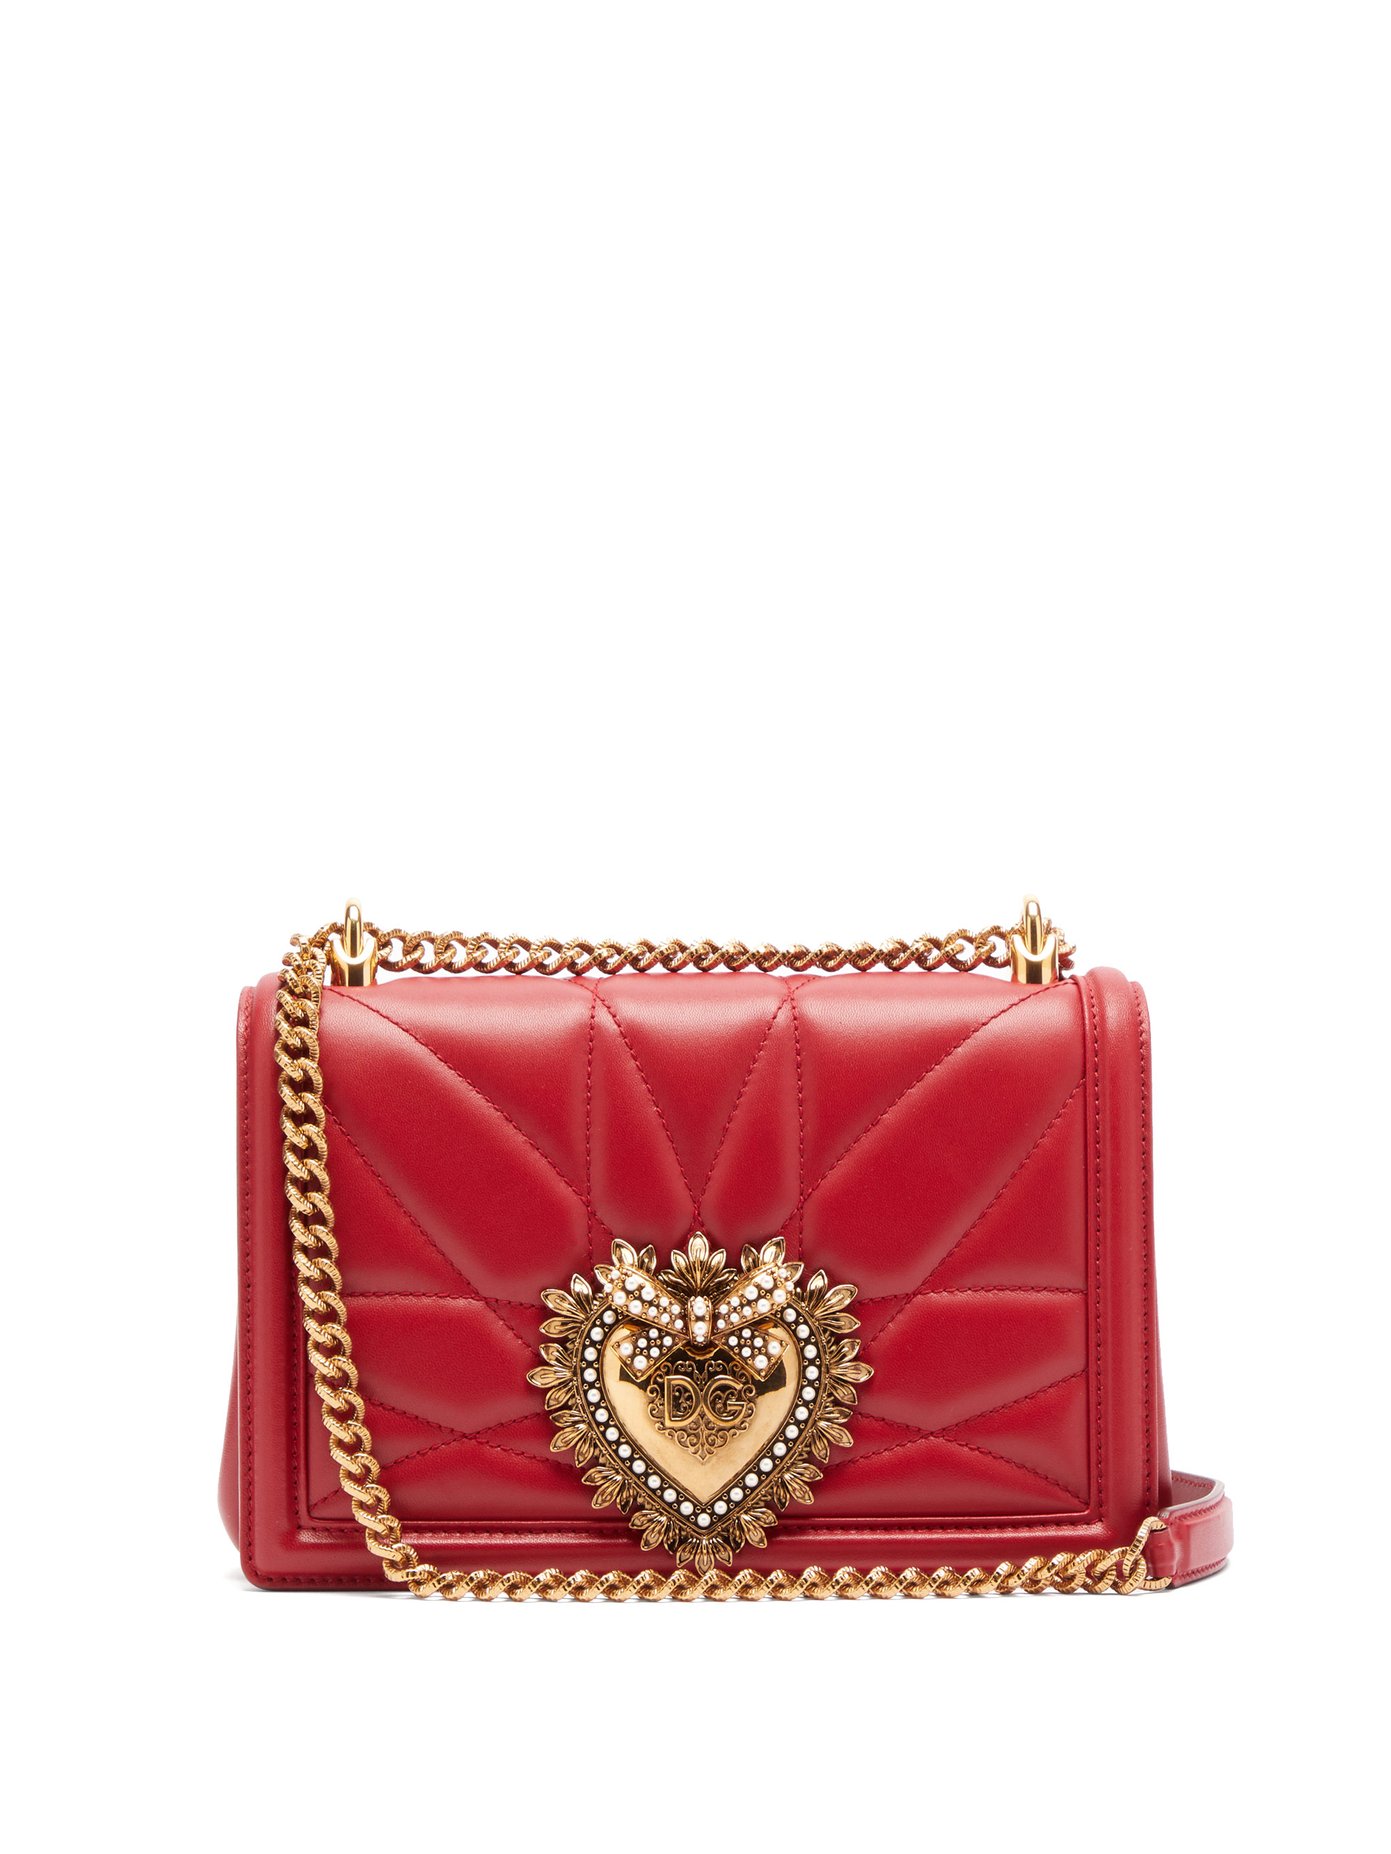 red leather cross body bag